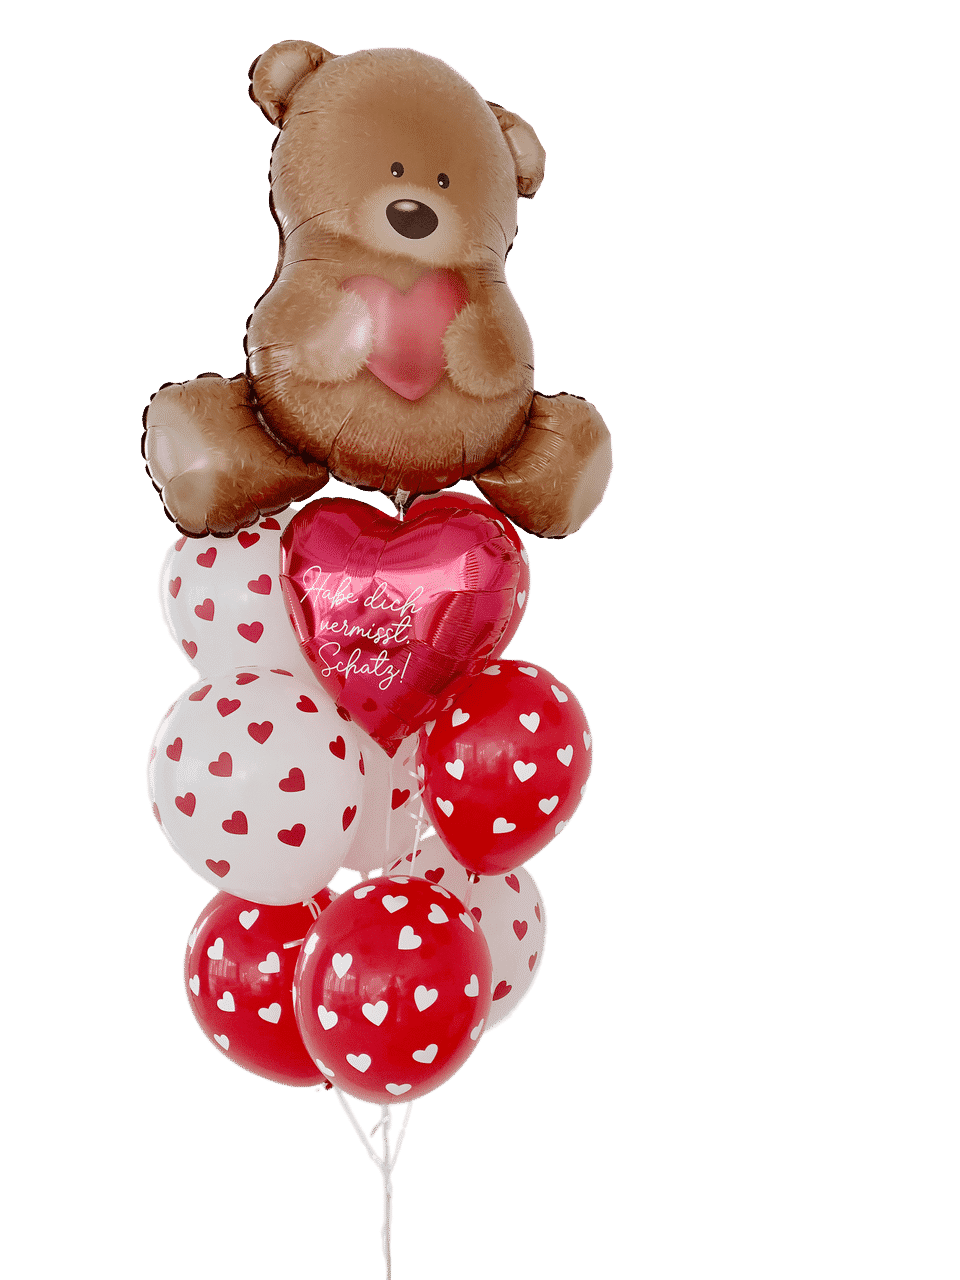 Bear With Balloons PNG Free File Download